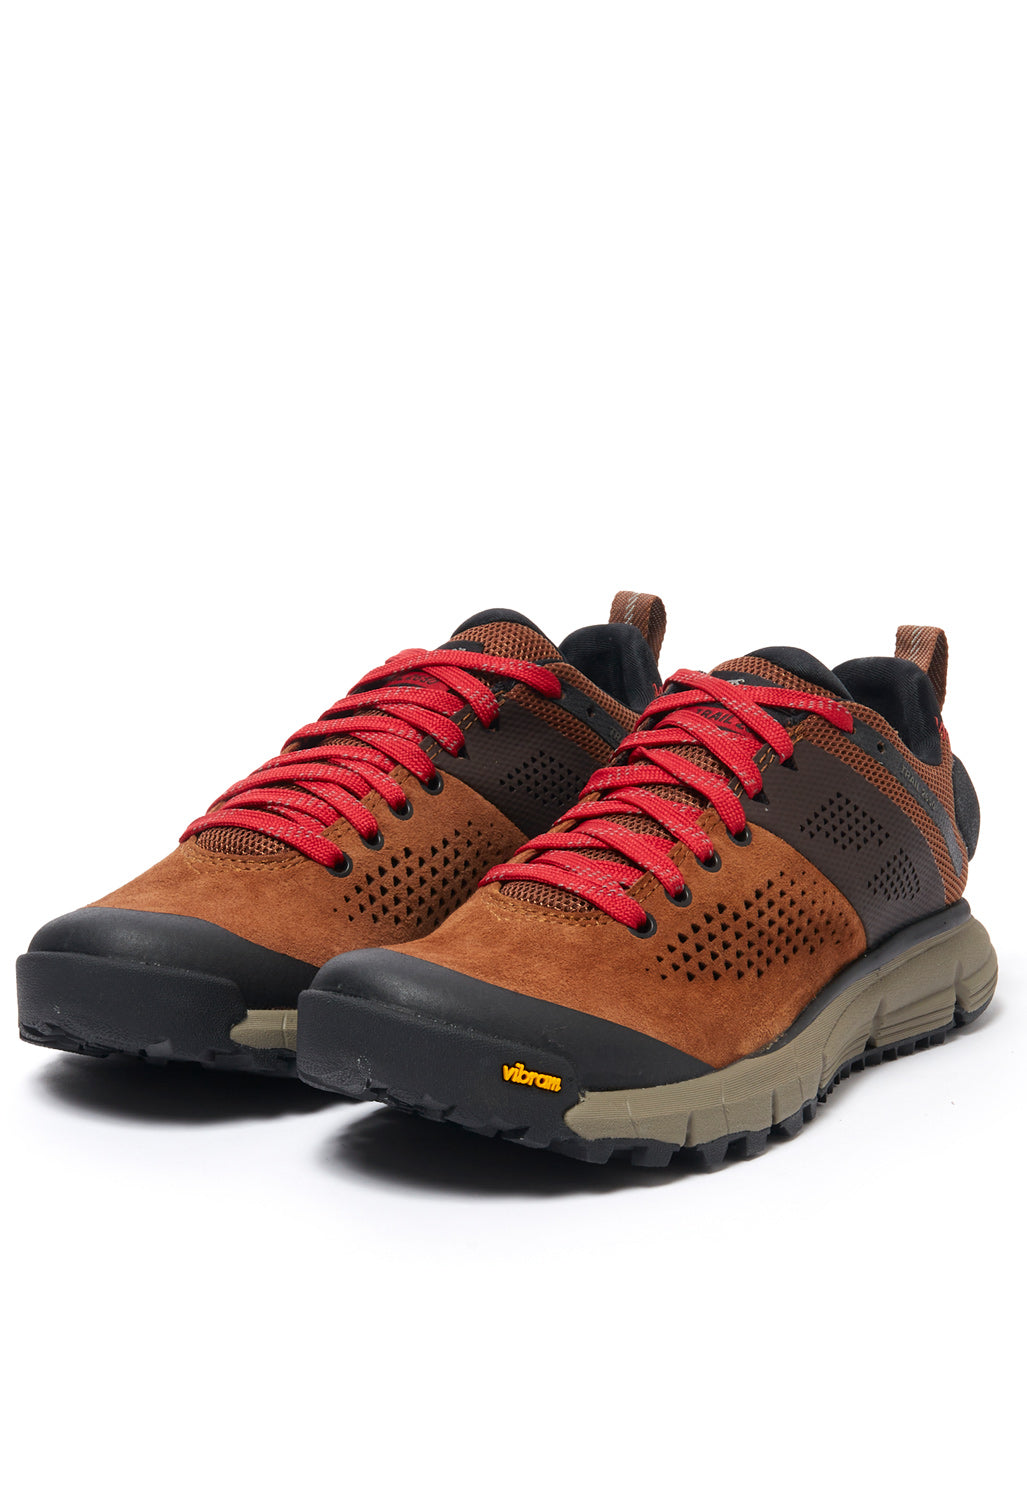 Danner Women's Trail 2650 Trainers - Brown/Red